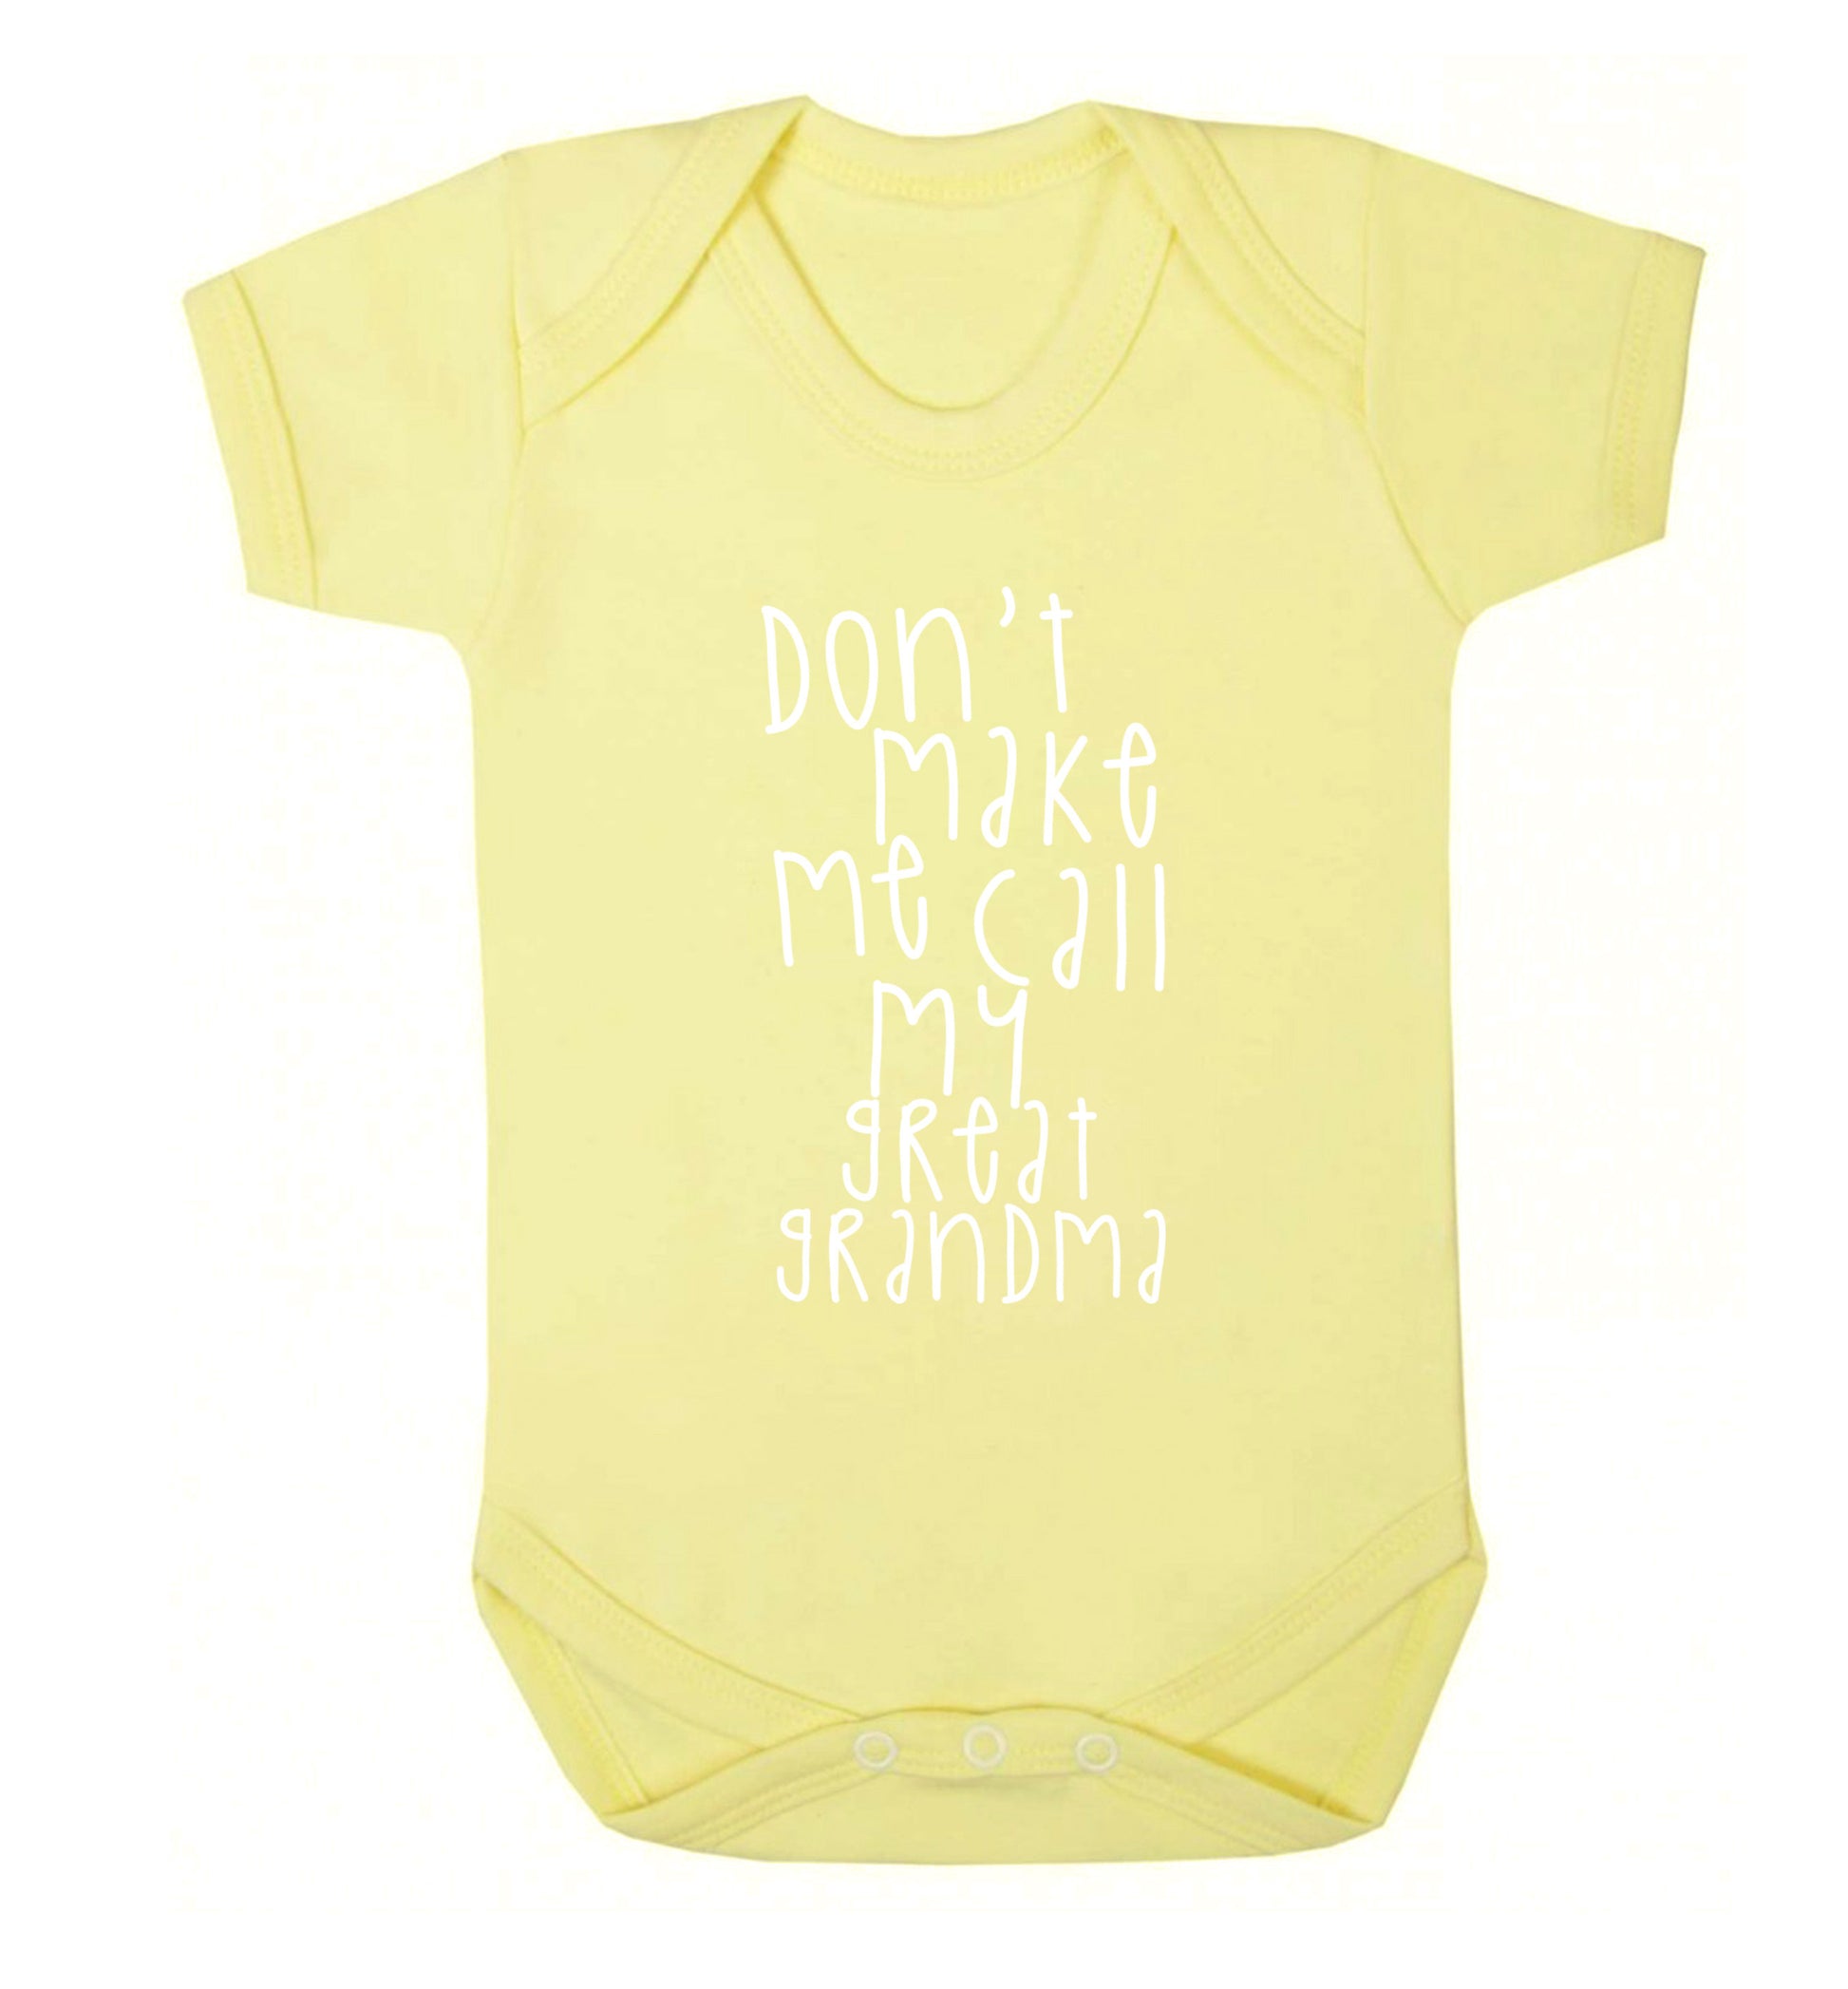 Don't make me call my great grandma Baby Vest pale yellow 18-24 months